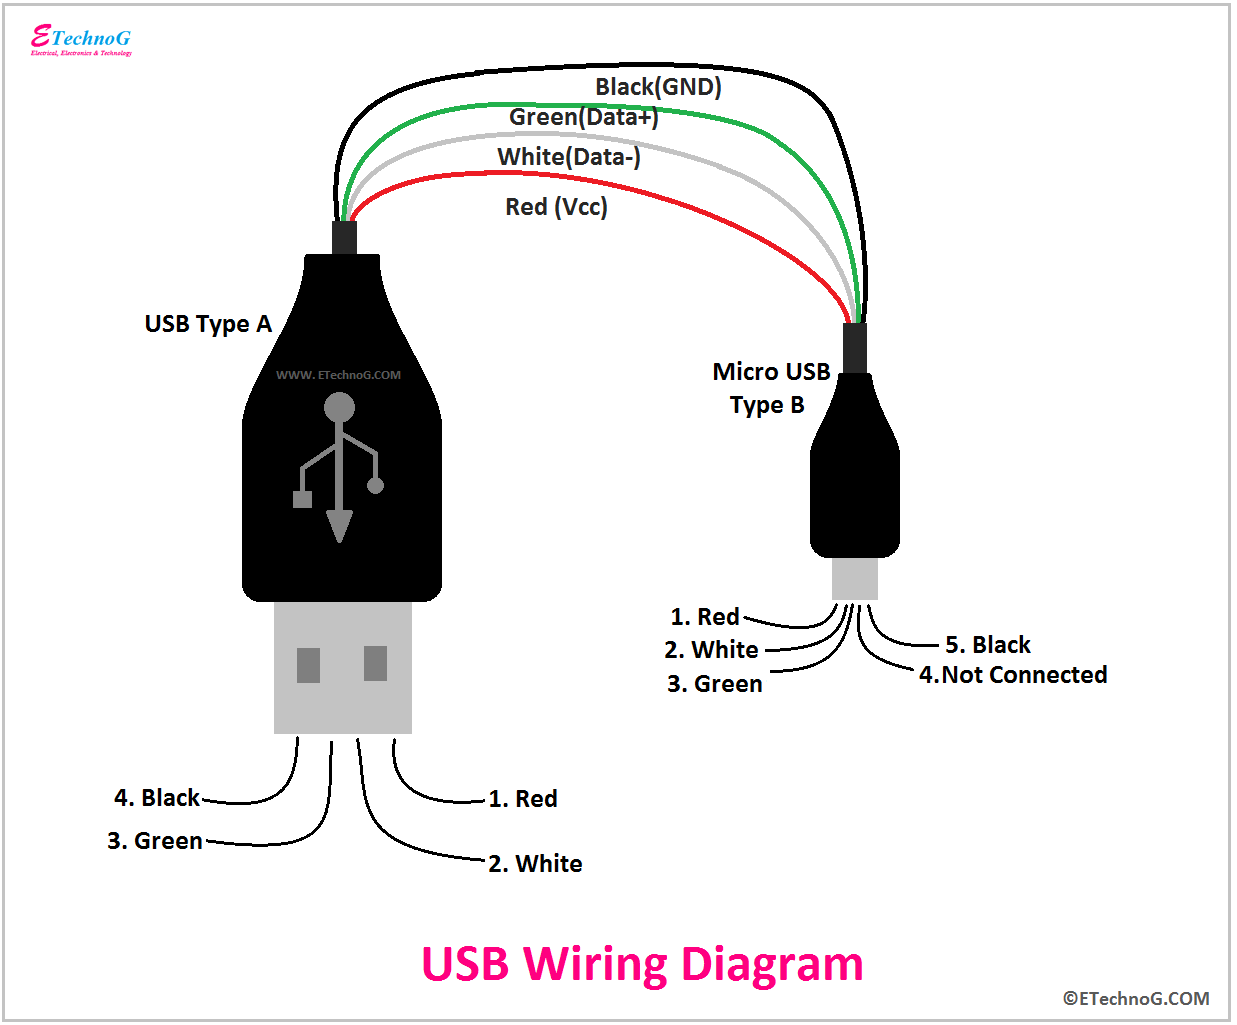 USB Wiring Diagram, Connection, PinOut, Terminals - ETechnoG  Wiring Diagram For Usb Plug    ETechnoG